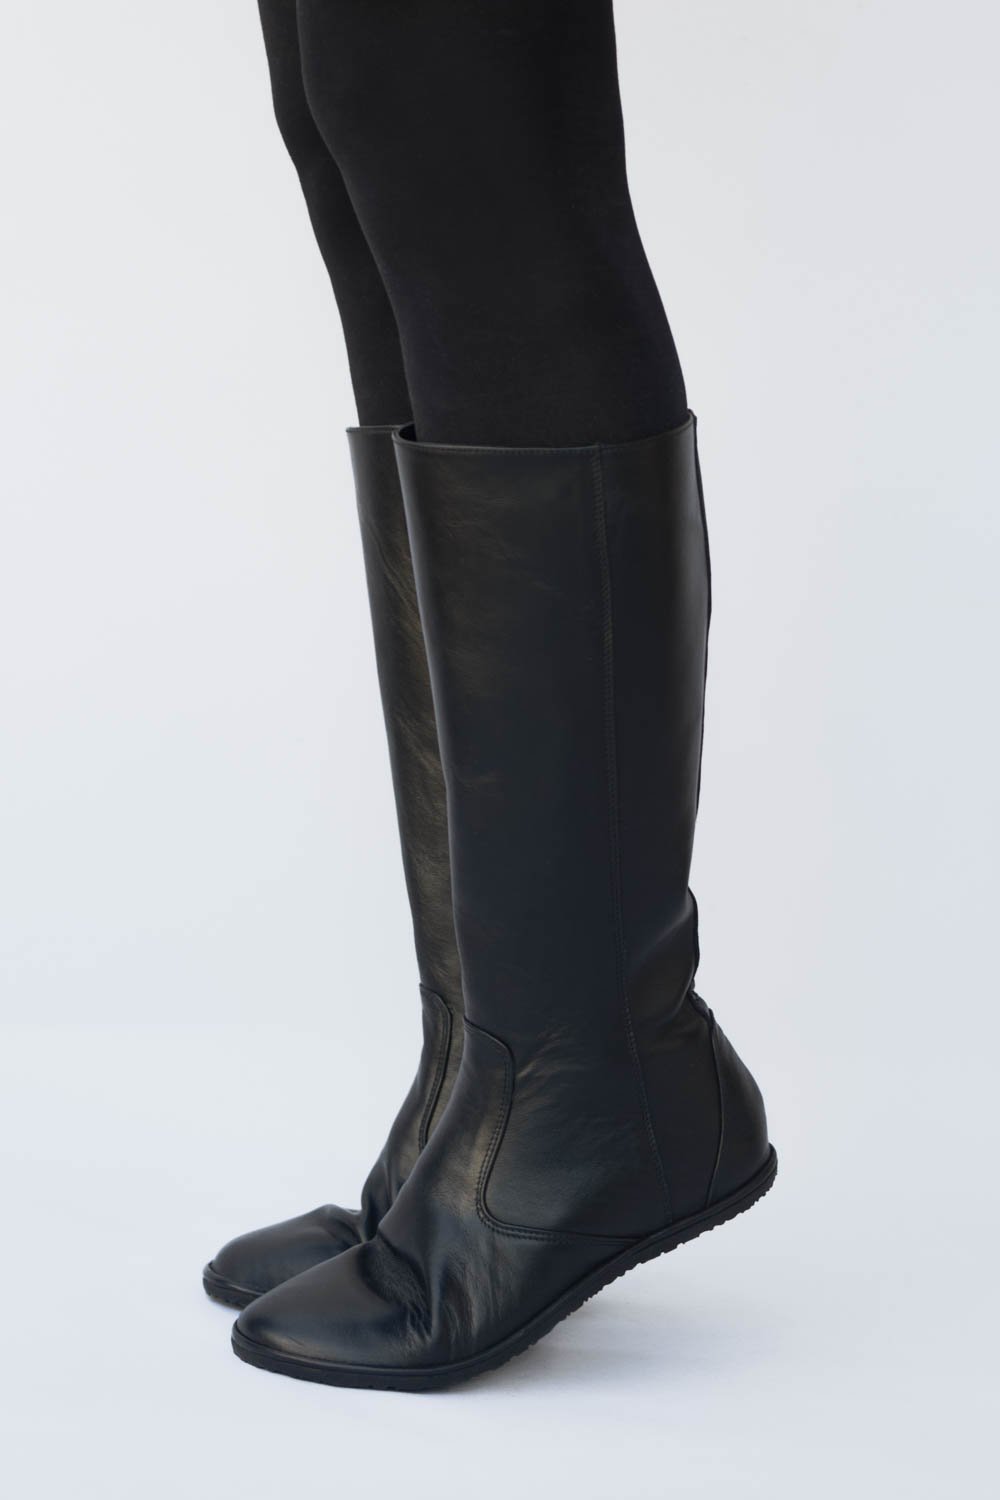 75mm Verner Leather Tall Boots